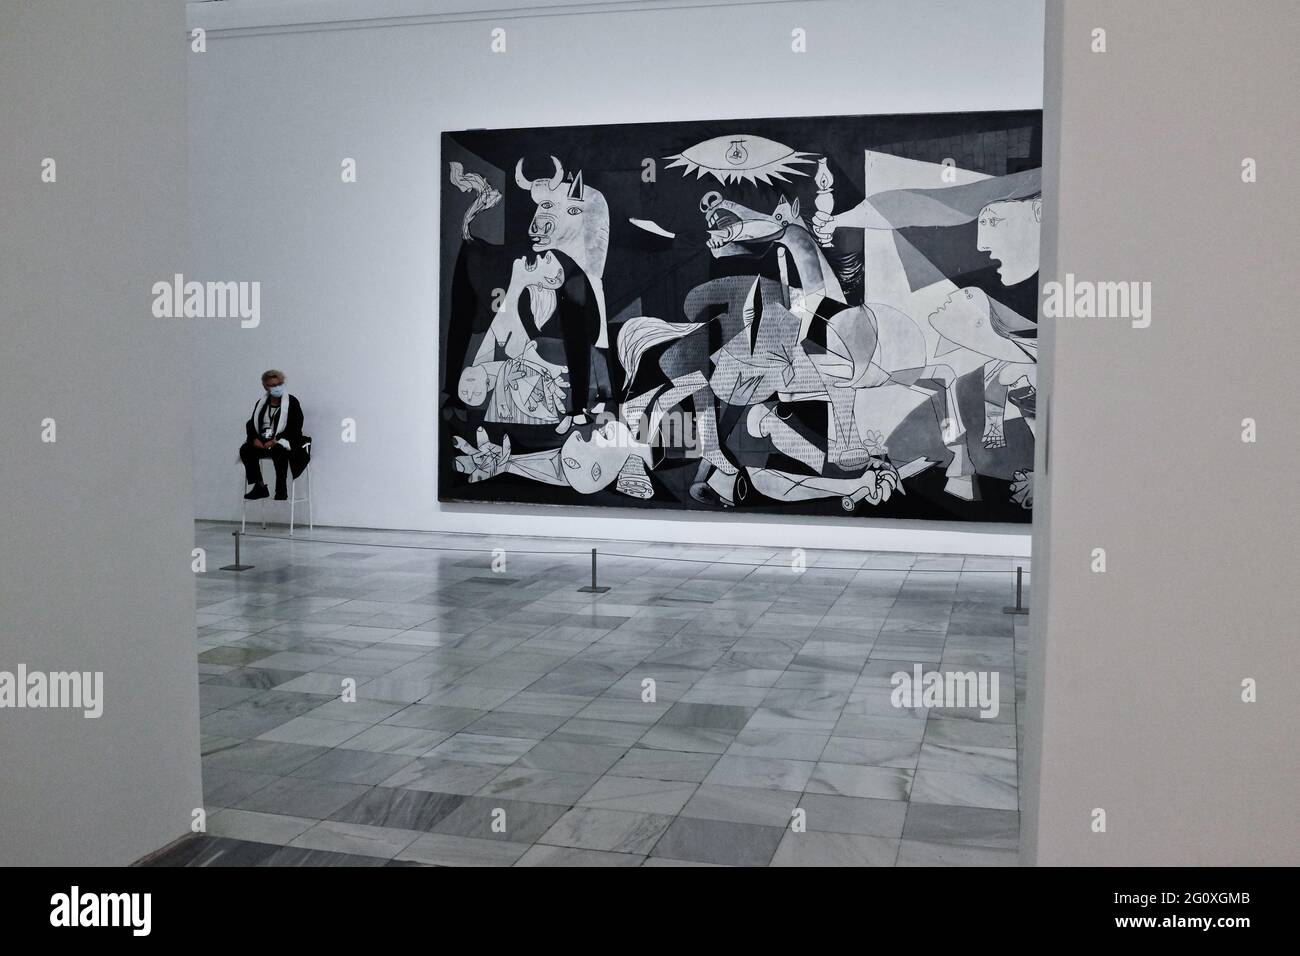 The famous Guernica, by Pablo Picasso, at the Reina Sofia museum, in Madrid, Spain. Stock Photo